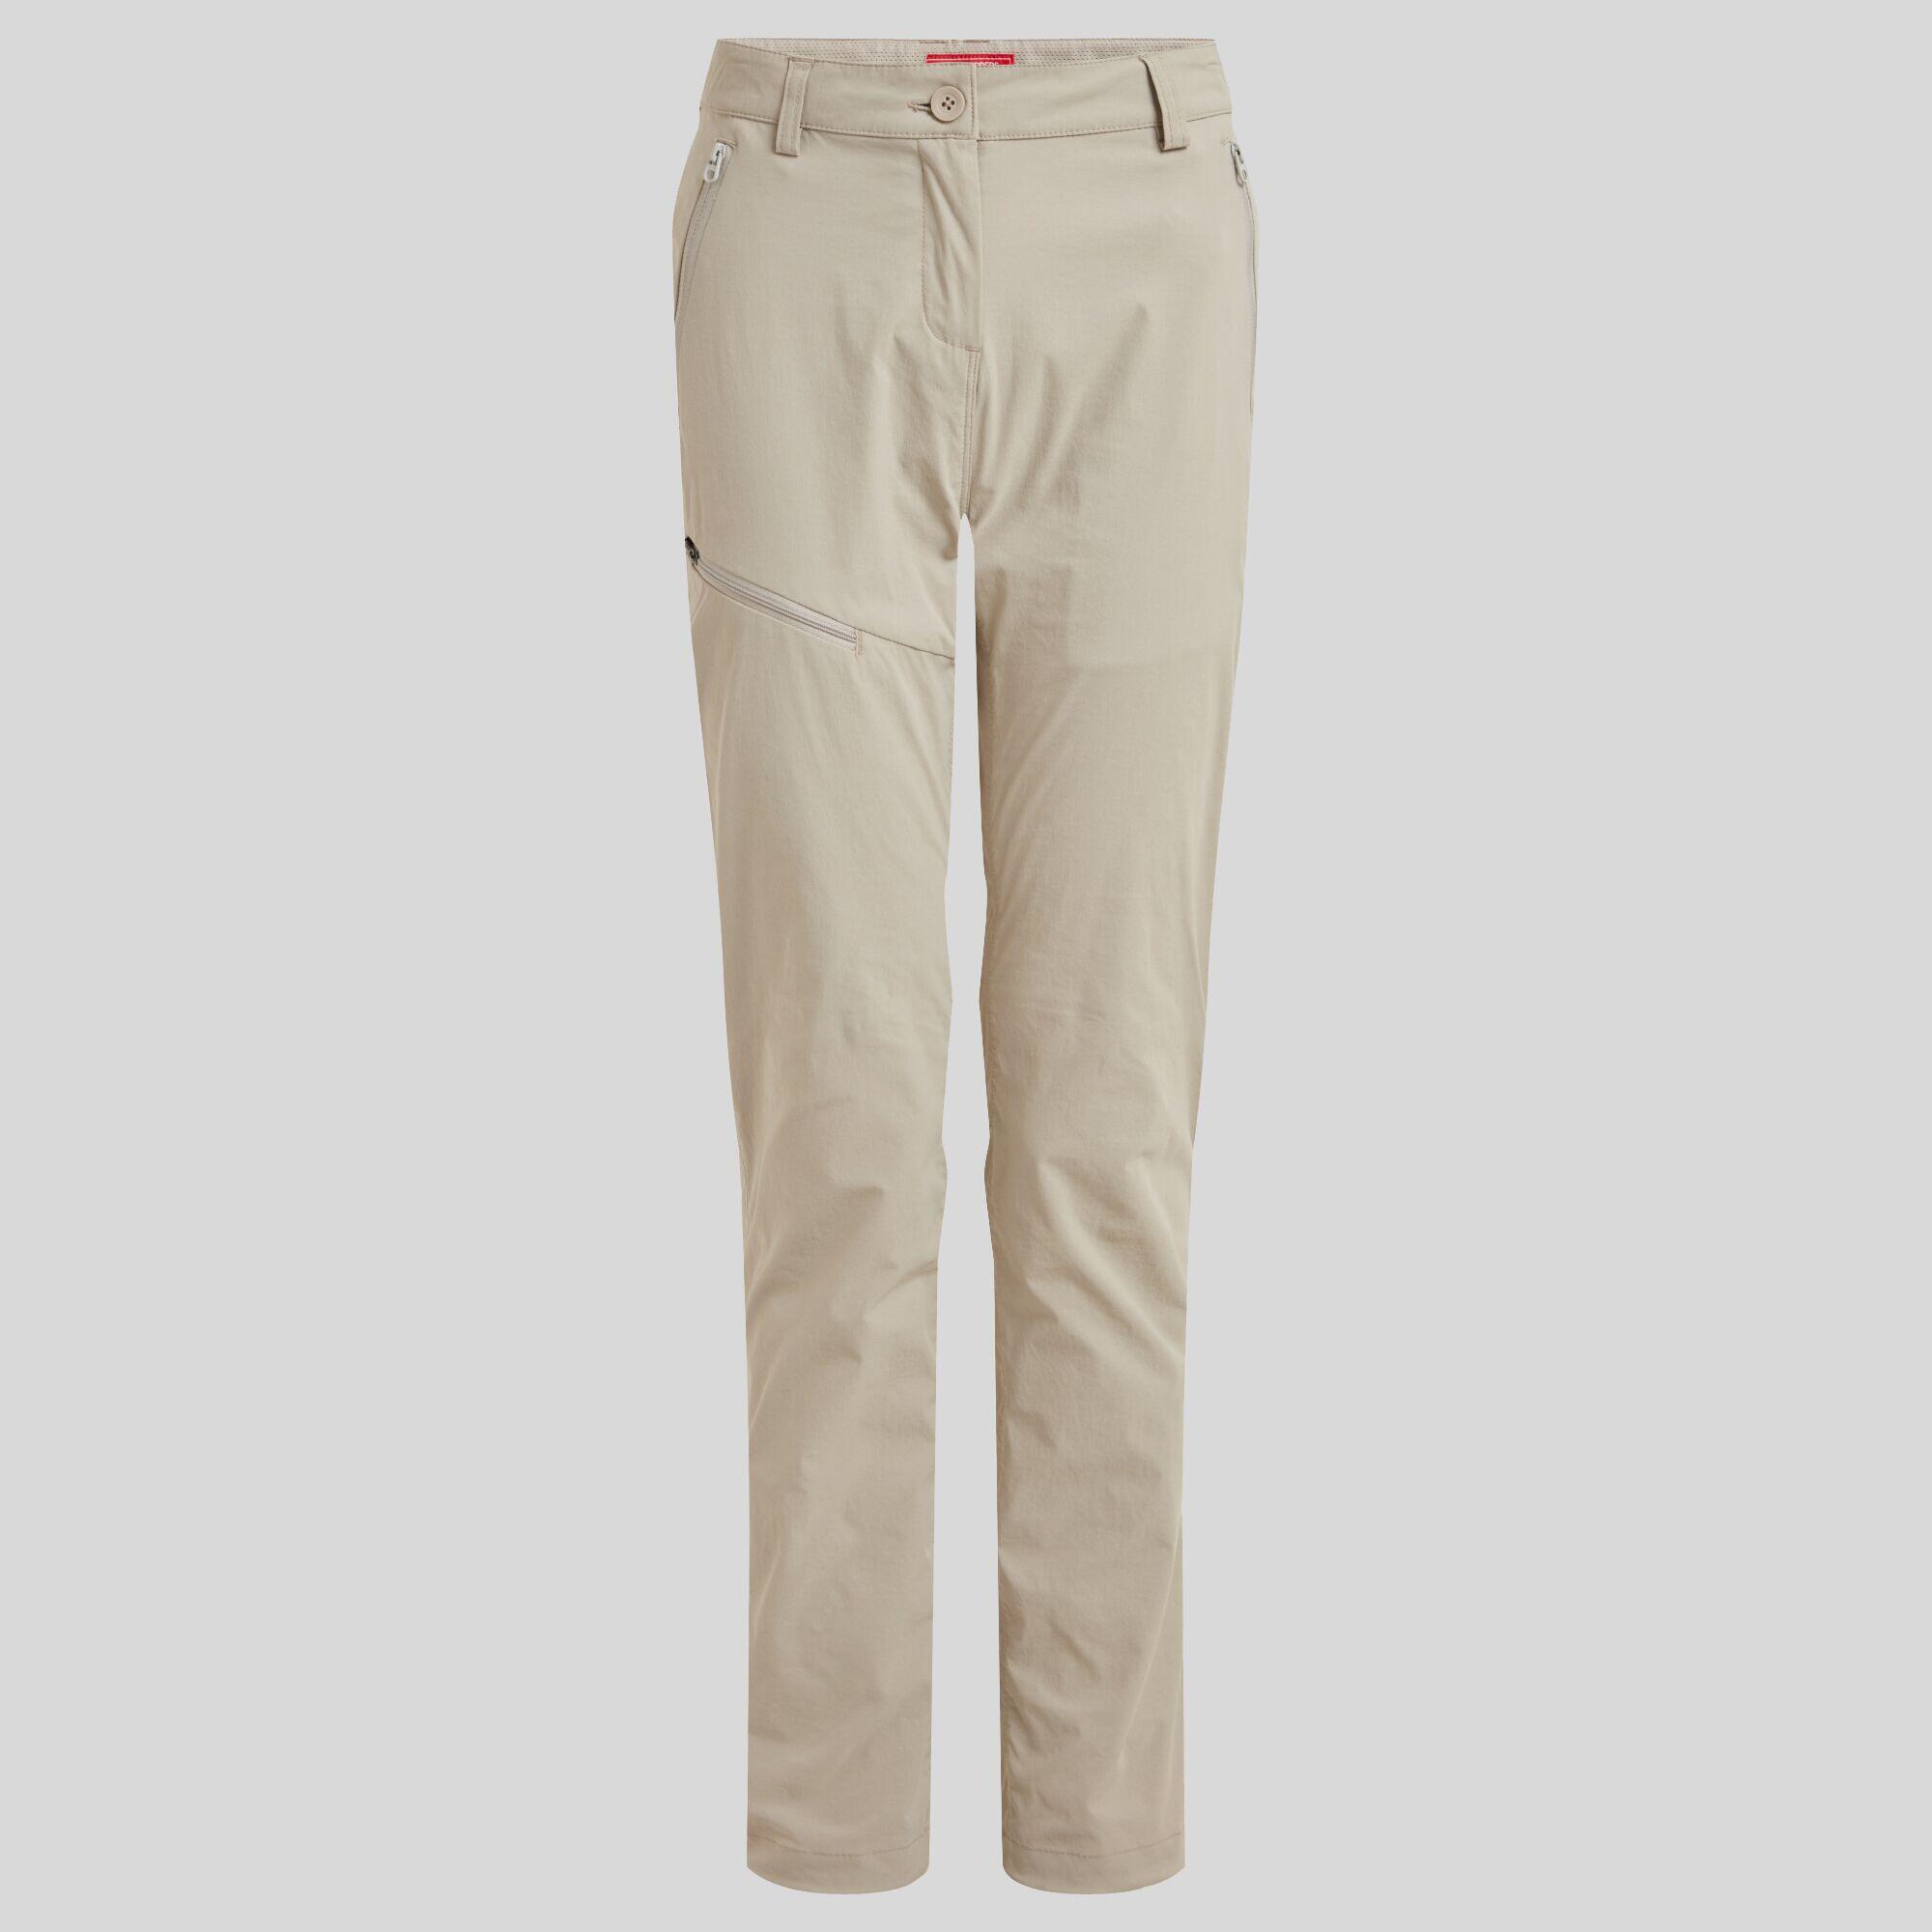 CRAGHOPPERS Womens Nosilife Pro Trouser